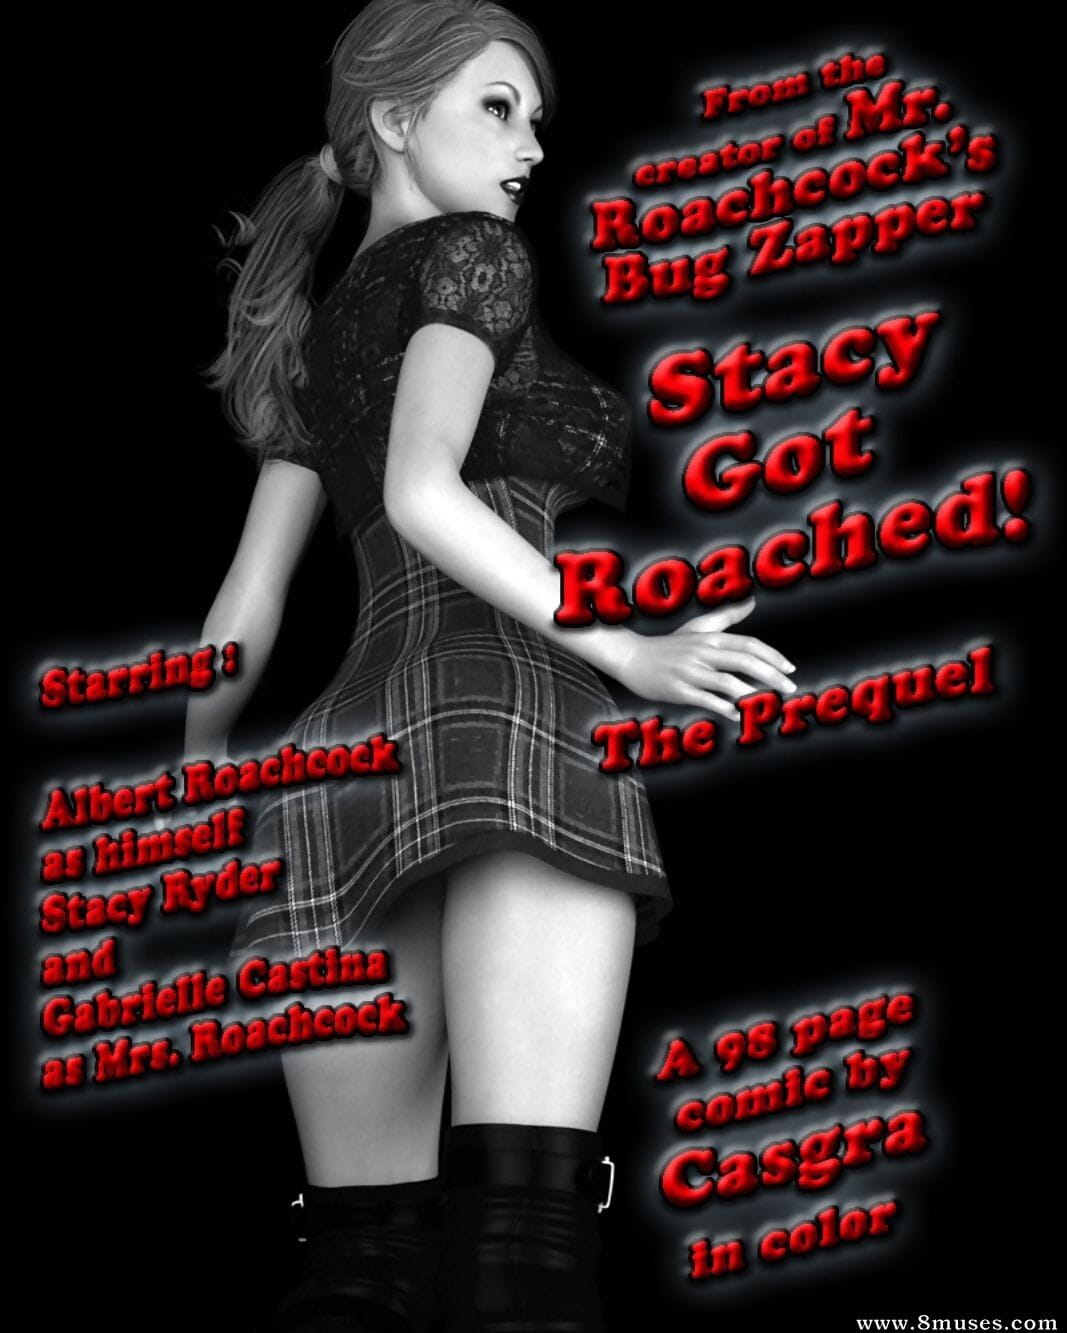 cagra Stacy Ottenuto roached page 1